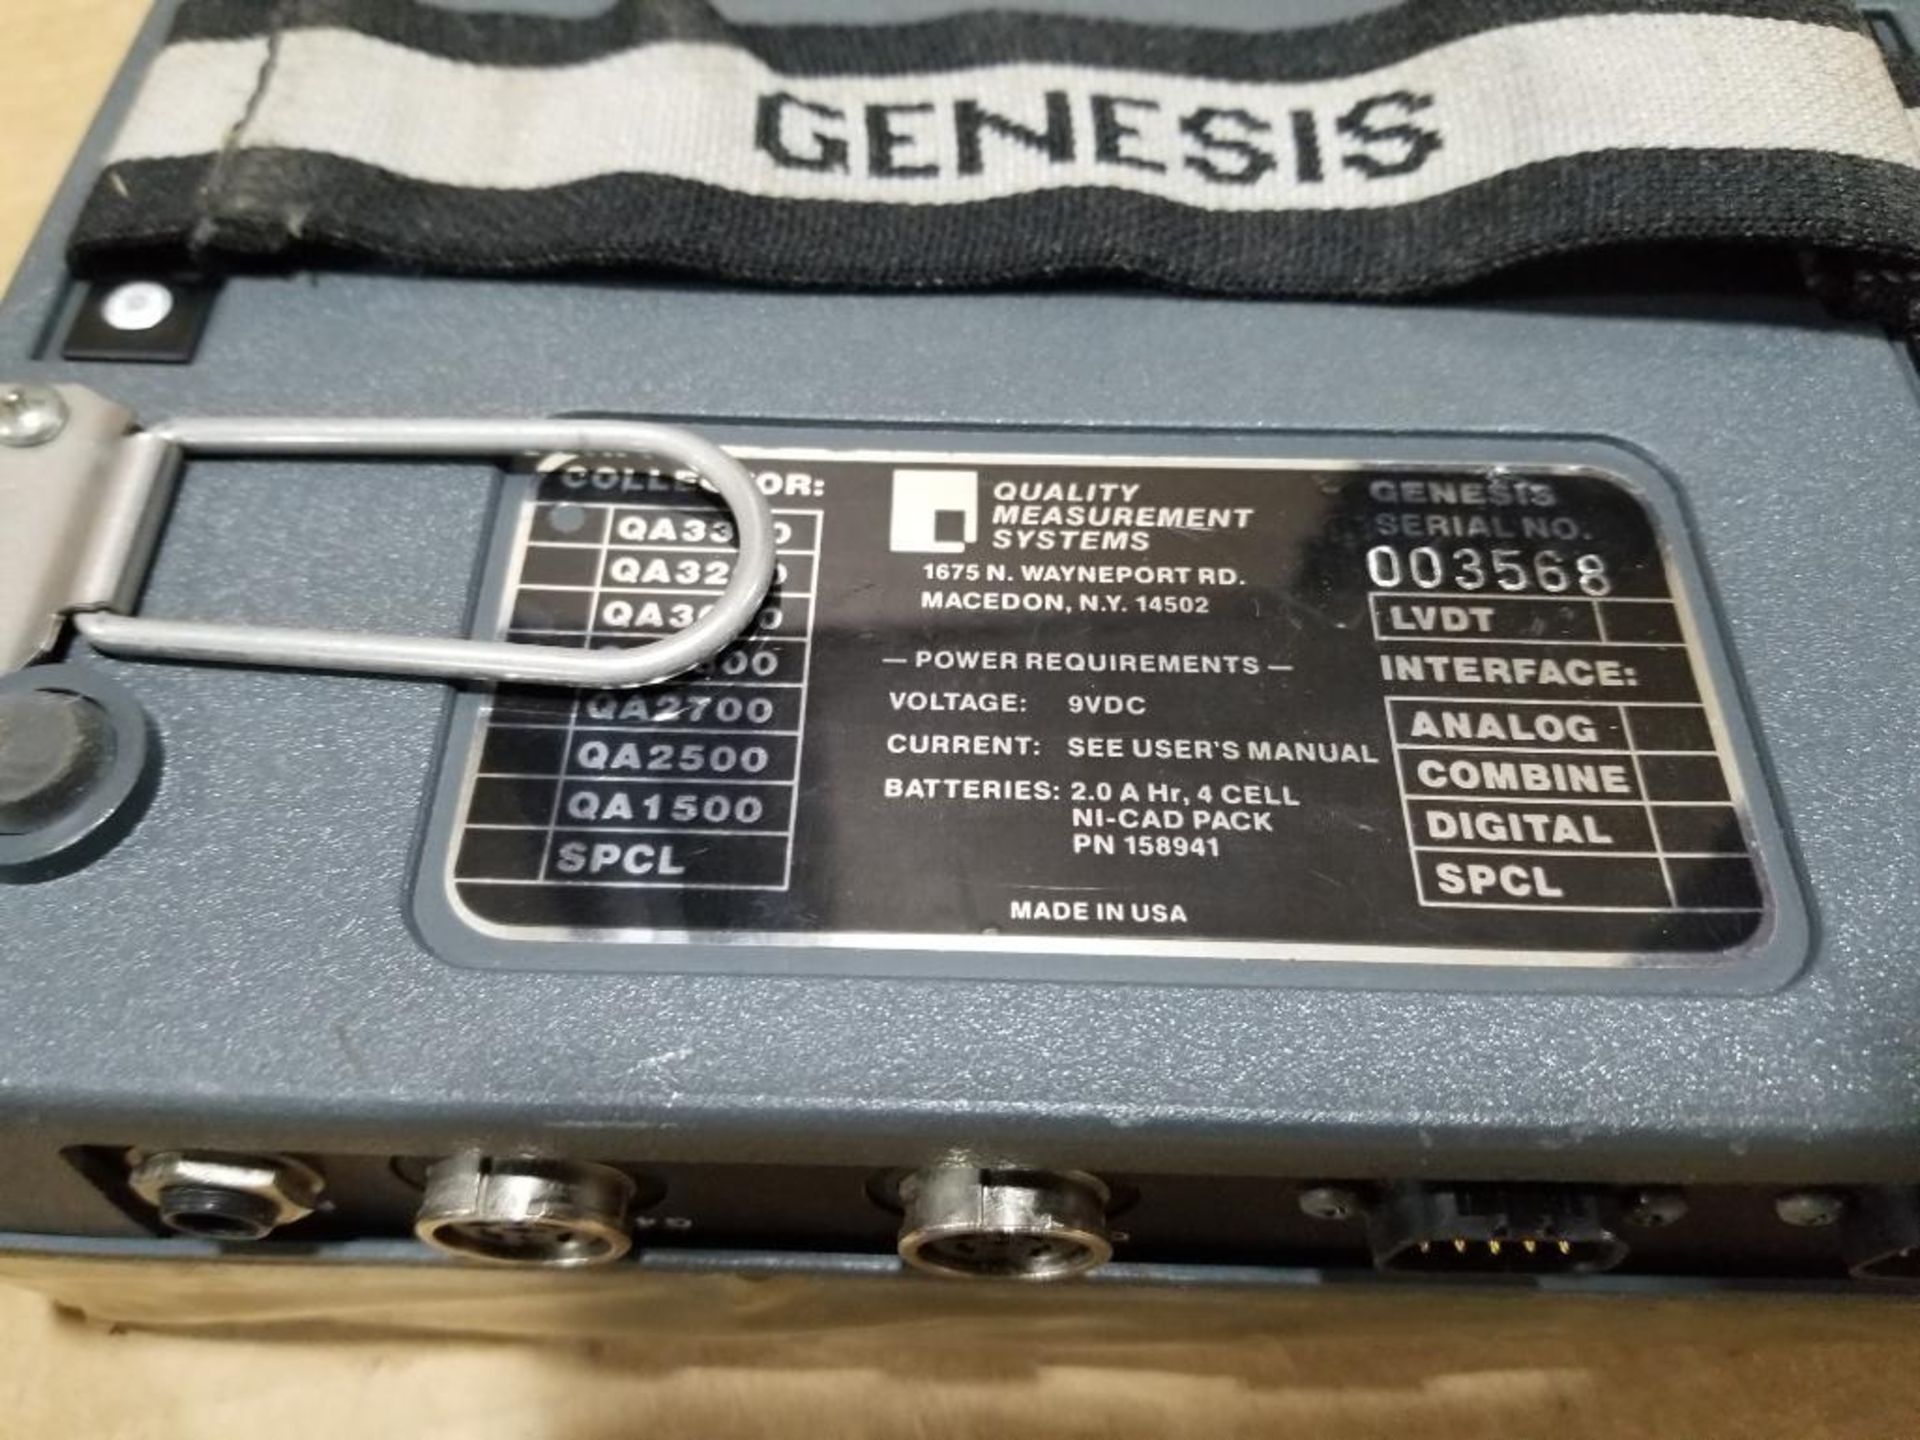 Qty 2 - Quality Measurement Systems controller. Part number Genesis QA3300. - Image 9 of 9